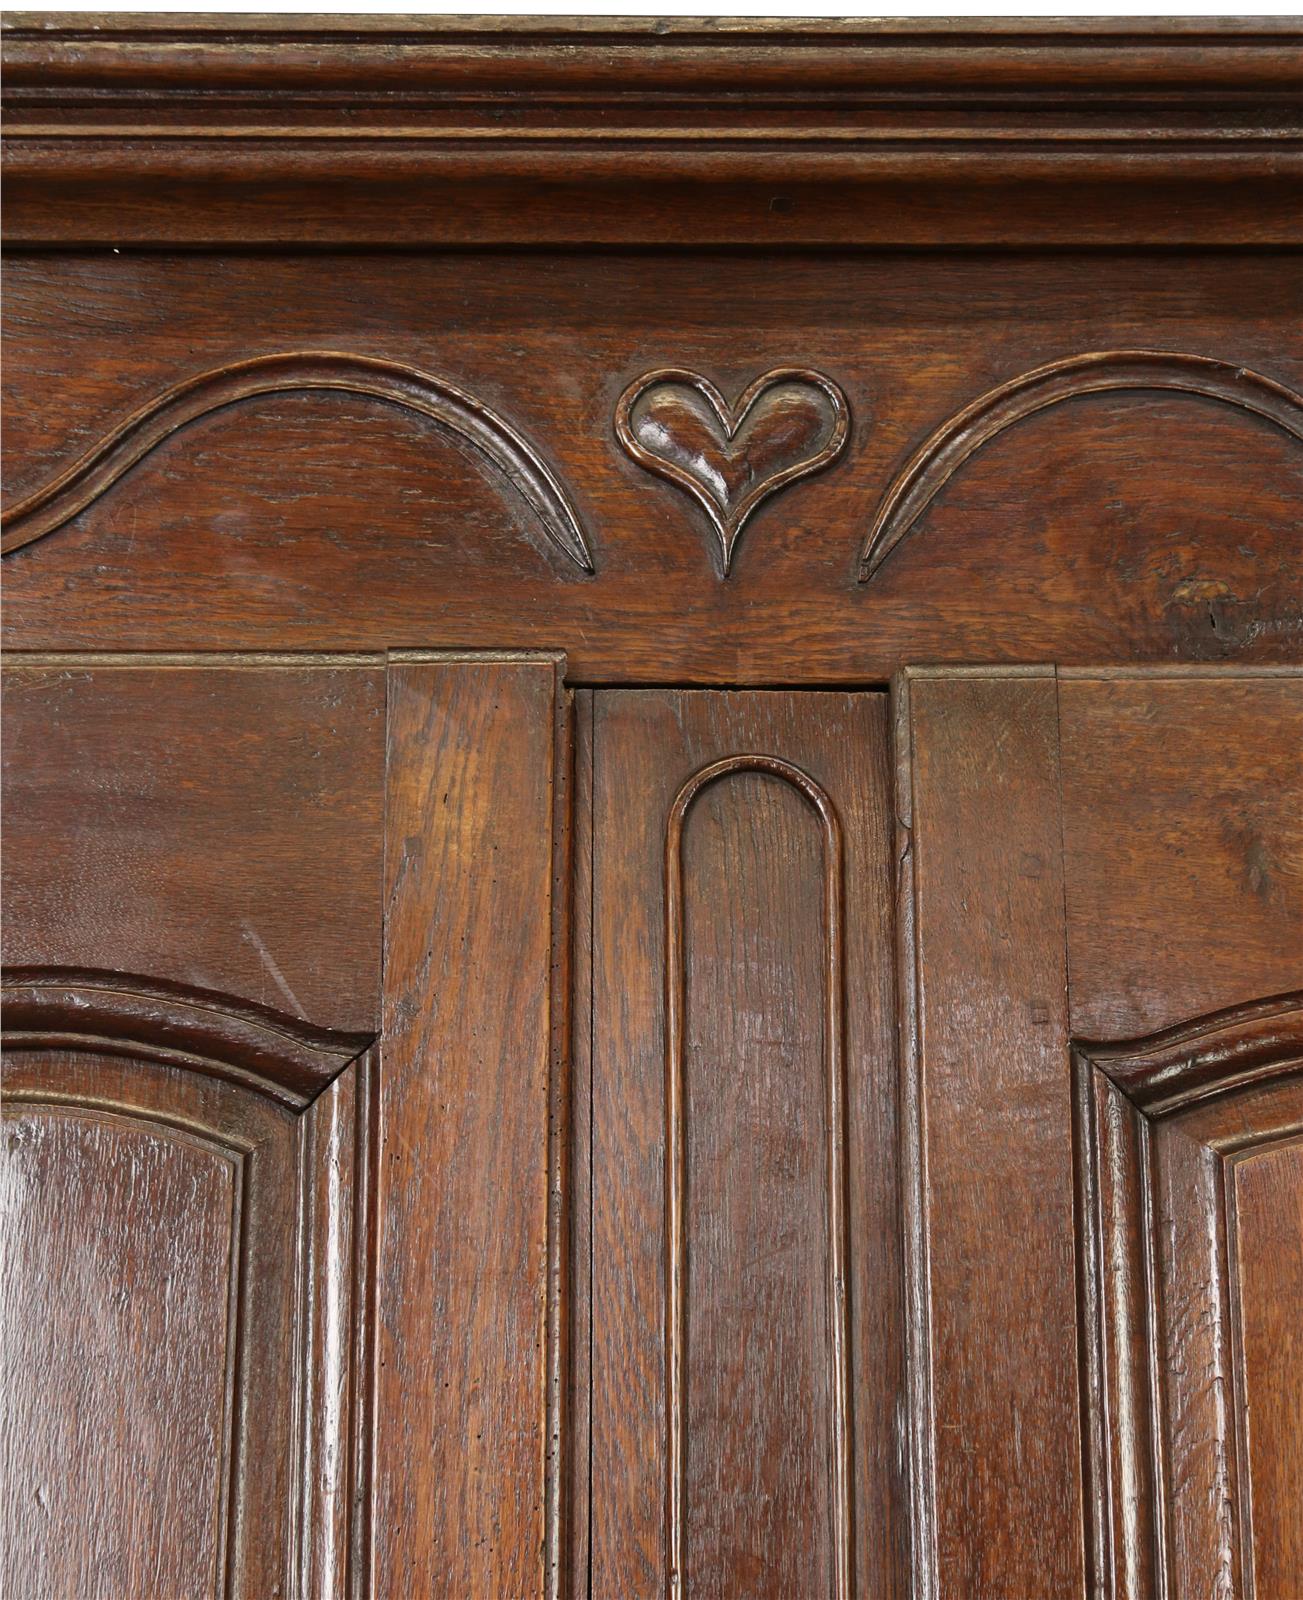 Armoire Antique French Provincial Very Old 1790 Oak Wood Peg Construction Heart -Image 3